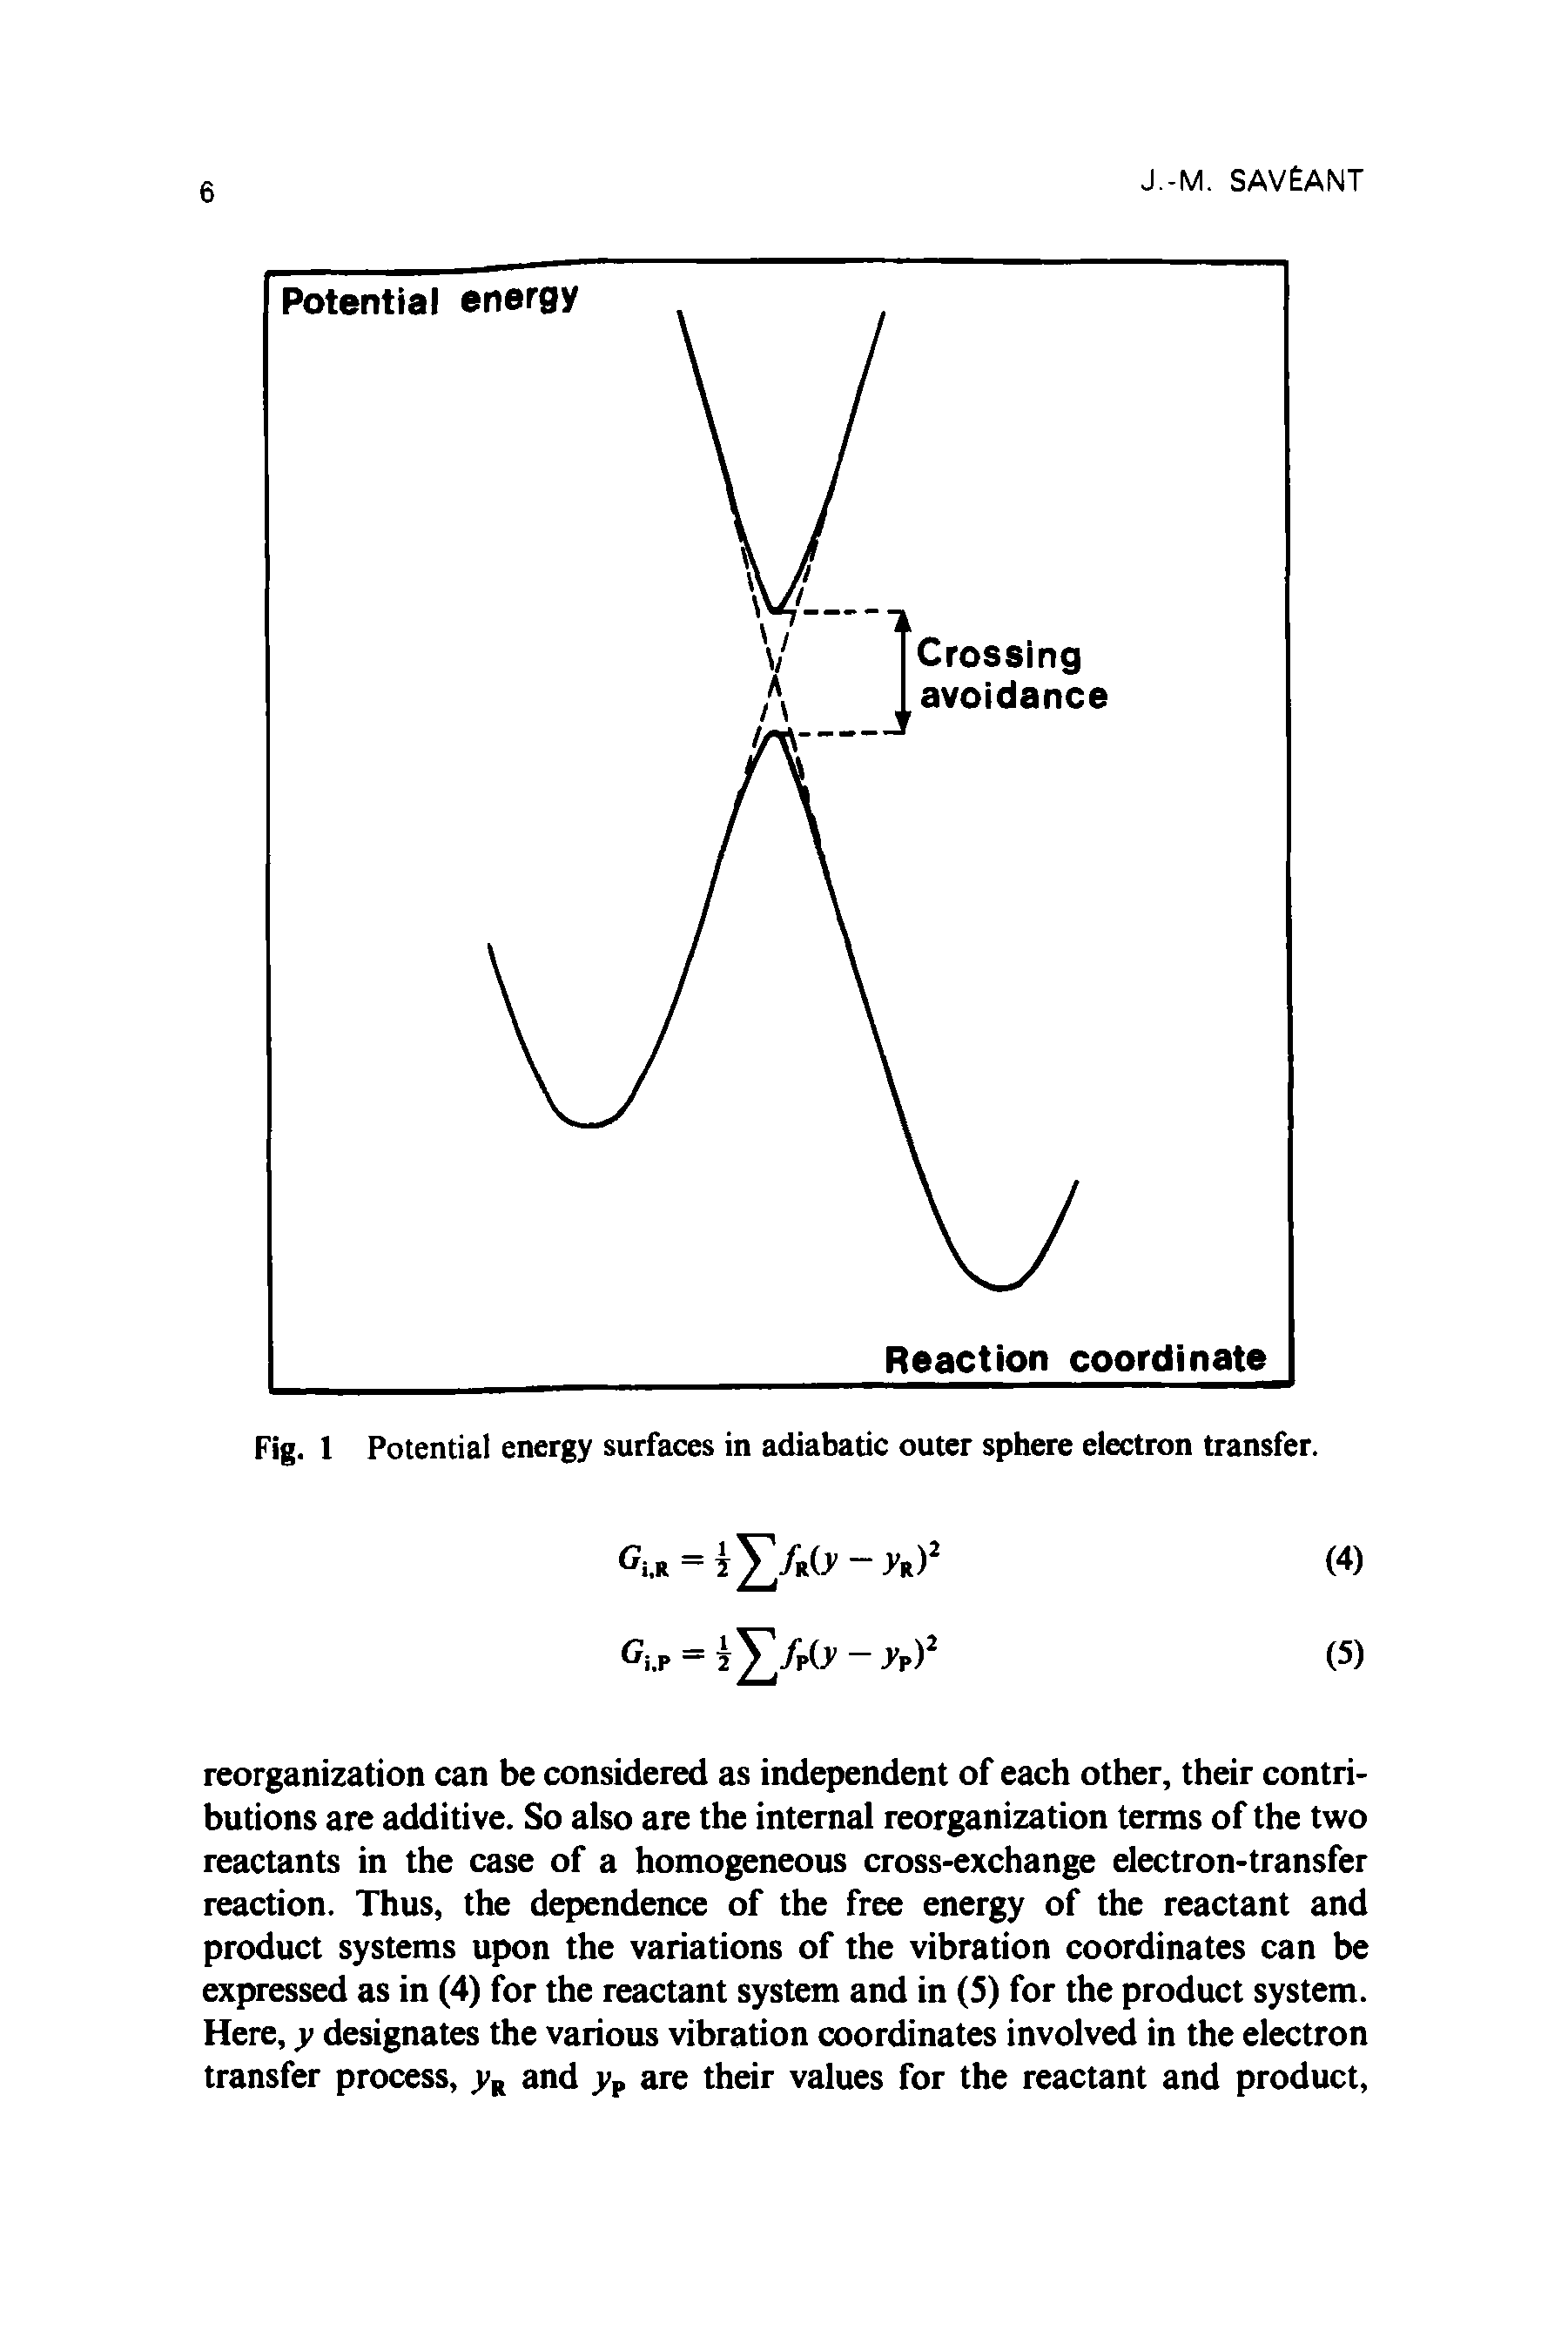 Fig. 1 Potential energy surfaces in adiabatic outer sphere electron transfer.